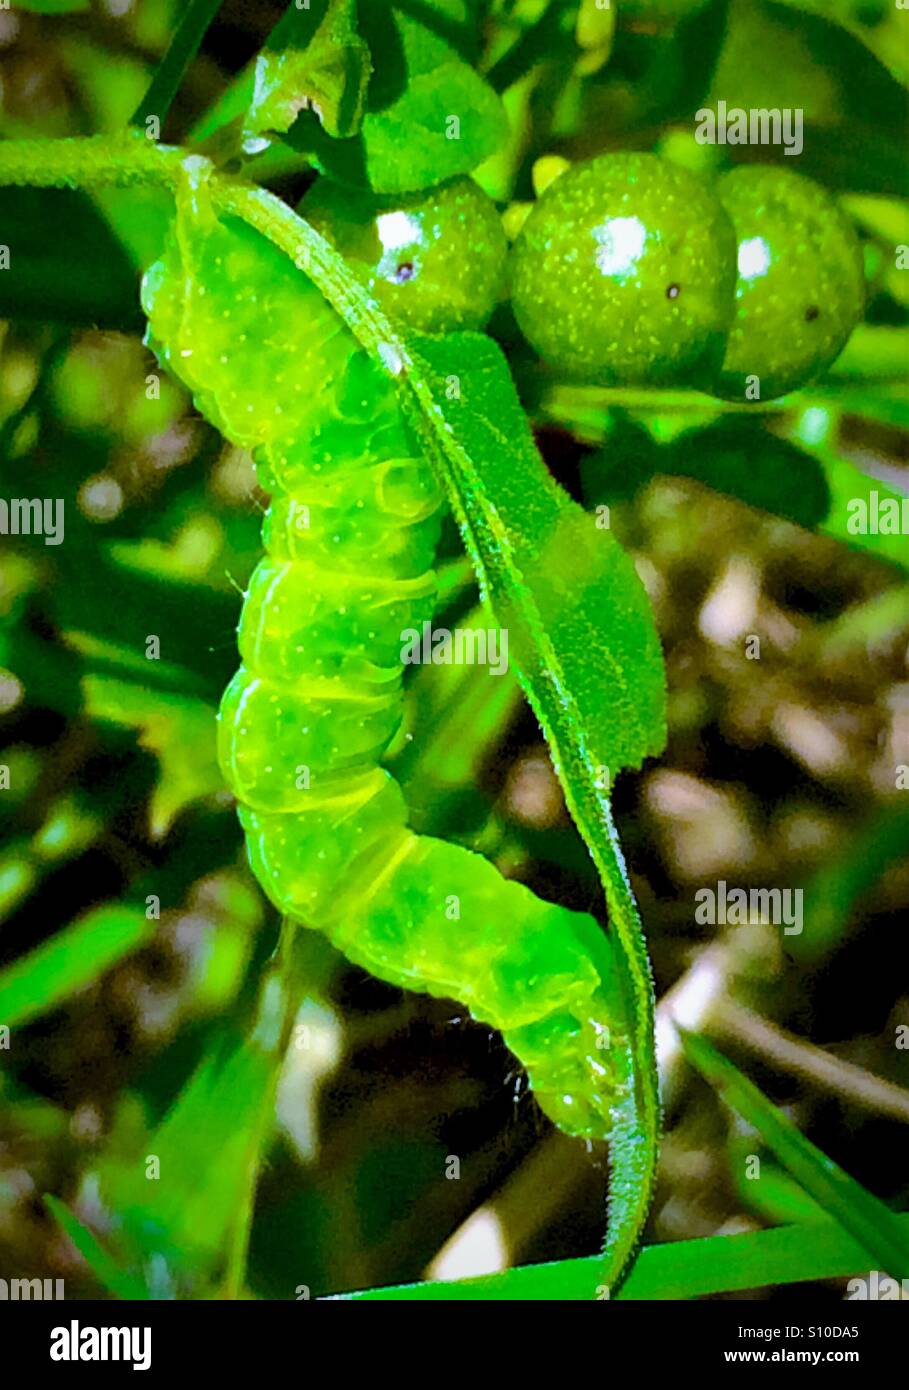 Macro view of a vibrant green caterpillar with green berries and background, Cabbage Looper, Trichopulsia ni Stock Photo